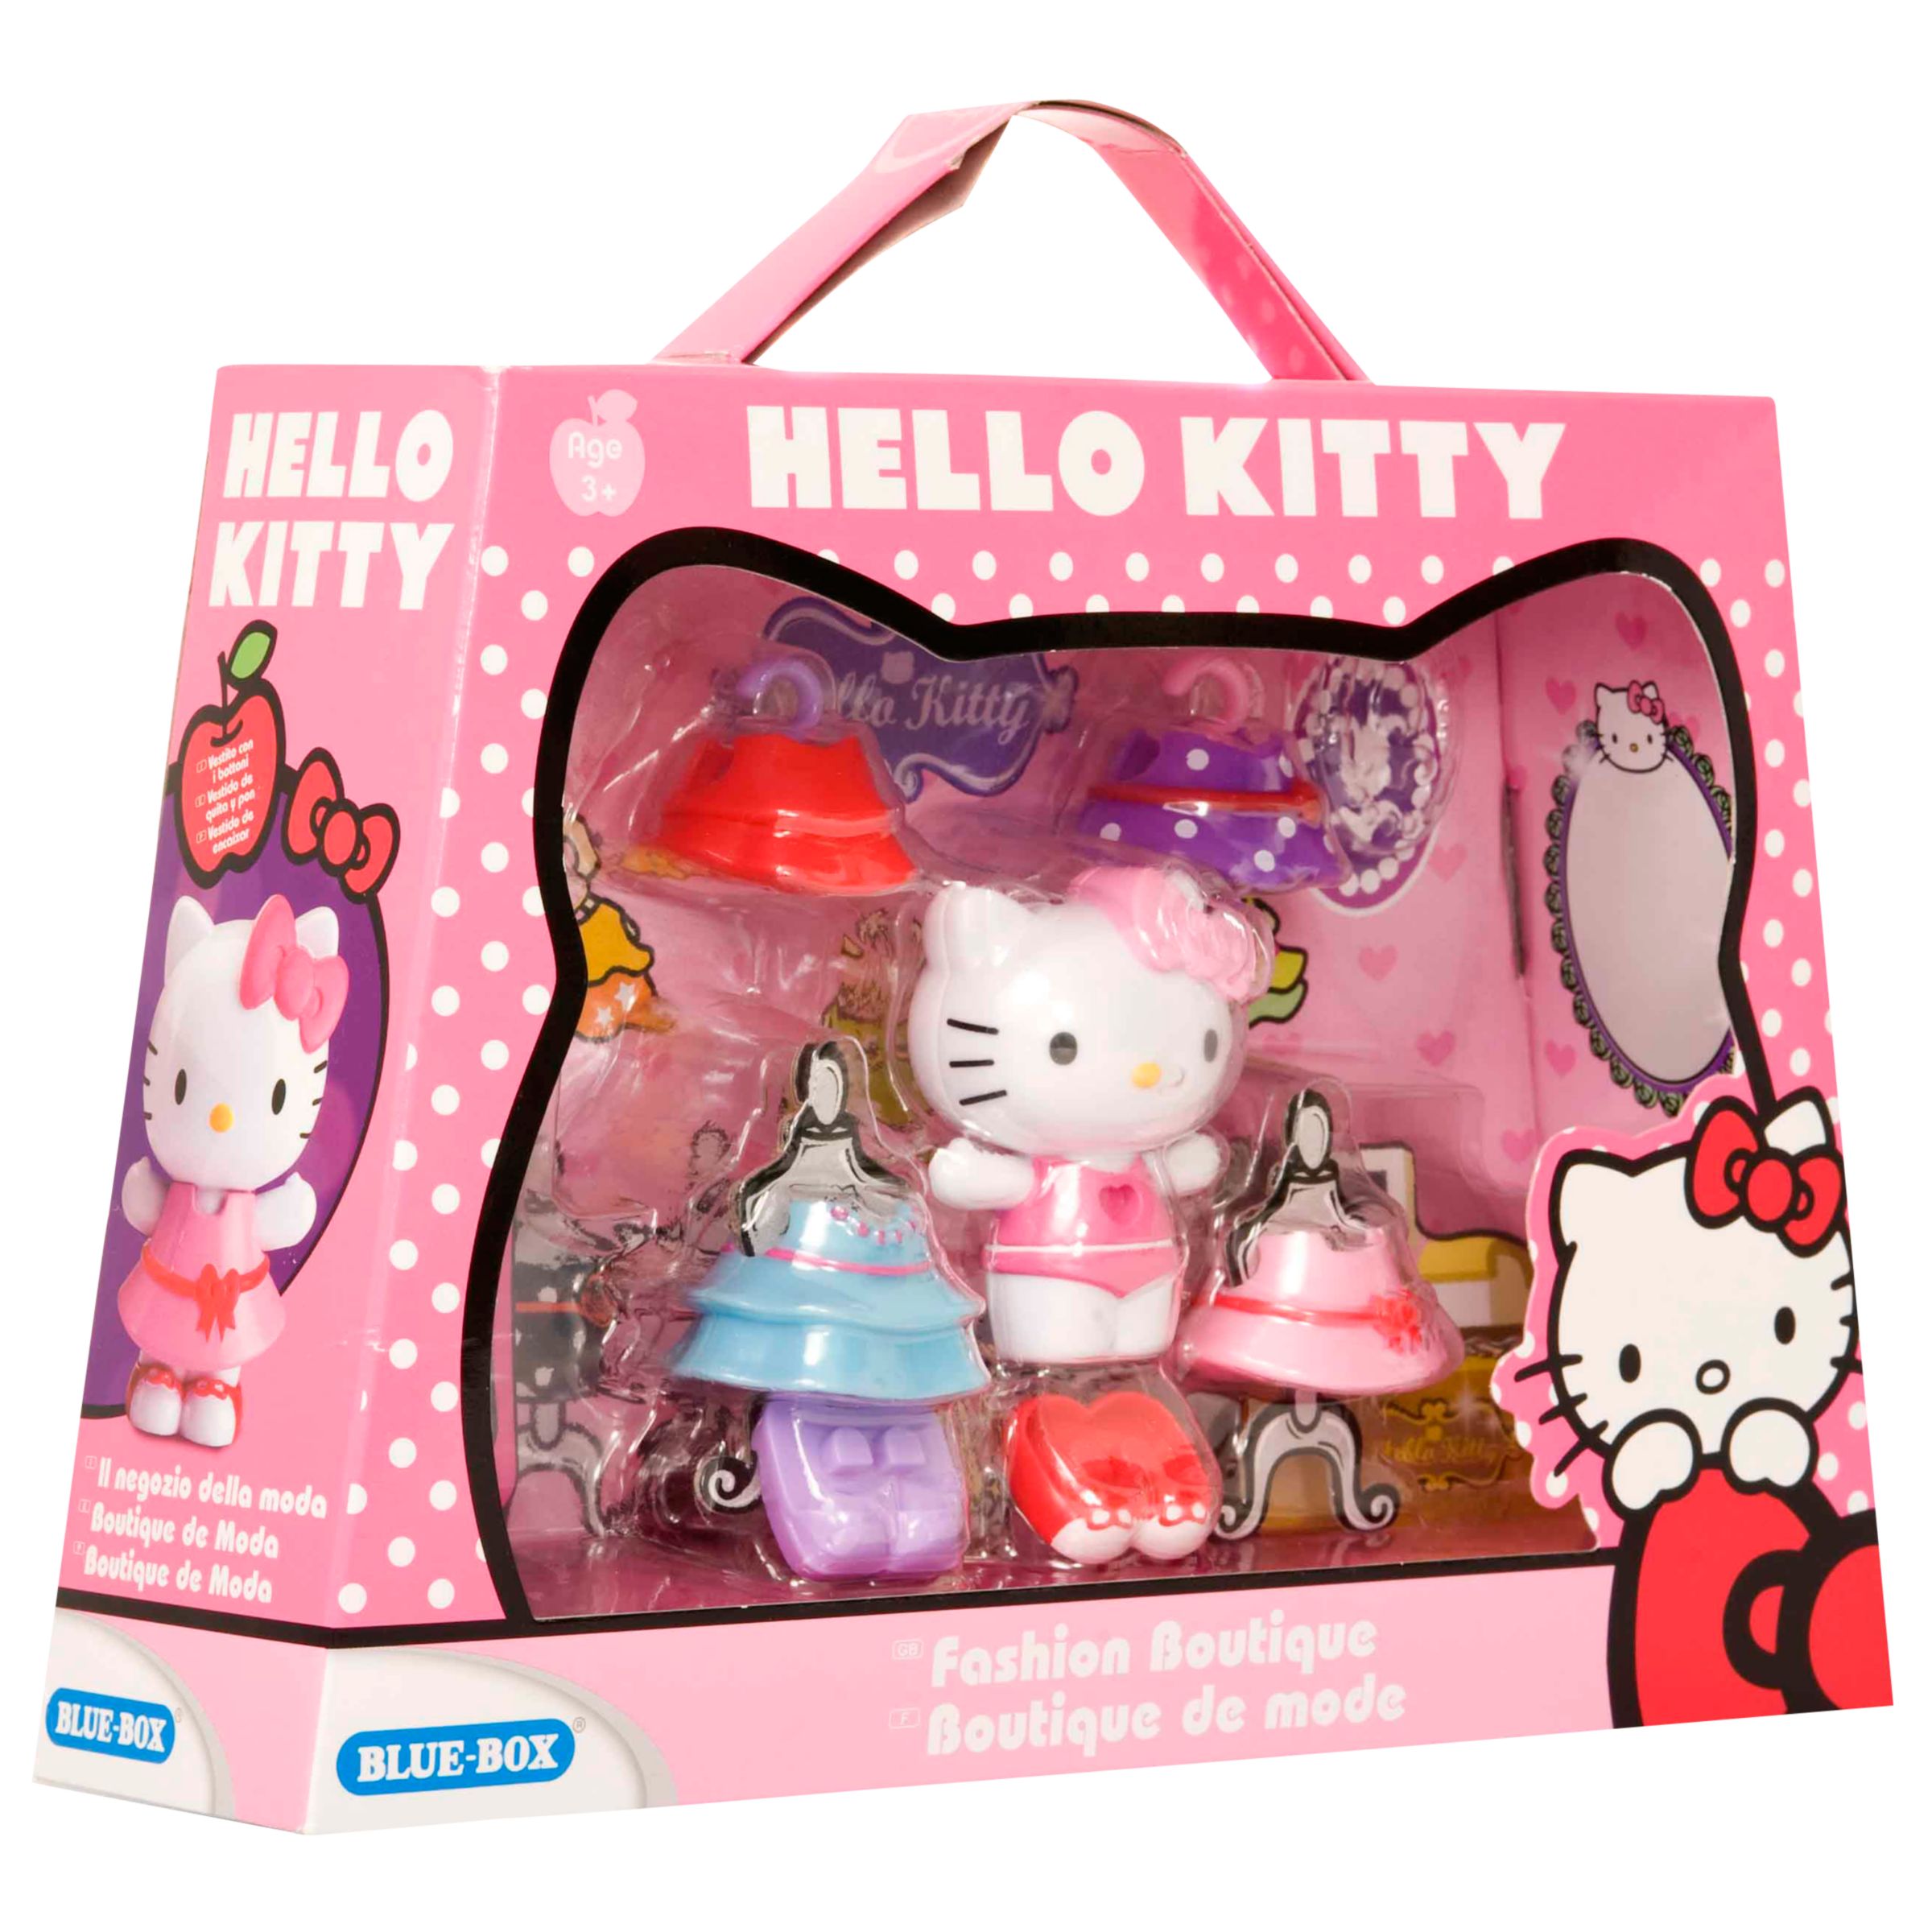 Fashion Boutiques Online on Buy Hello Kitty Fashion Boutique Online At Johnlewis Com   John Lewis